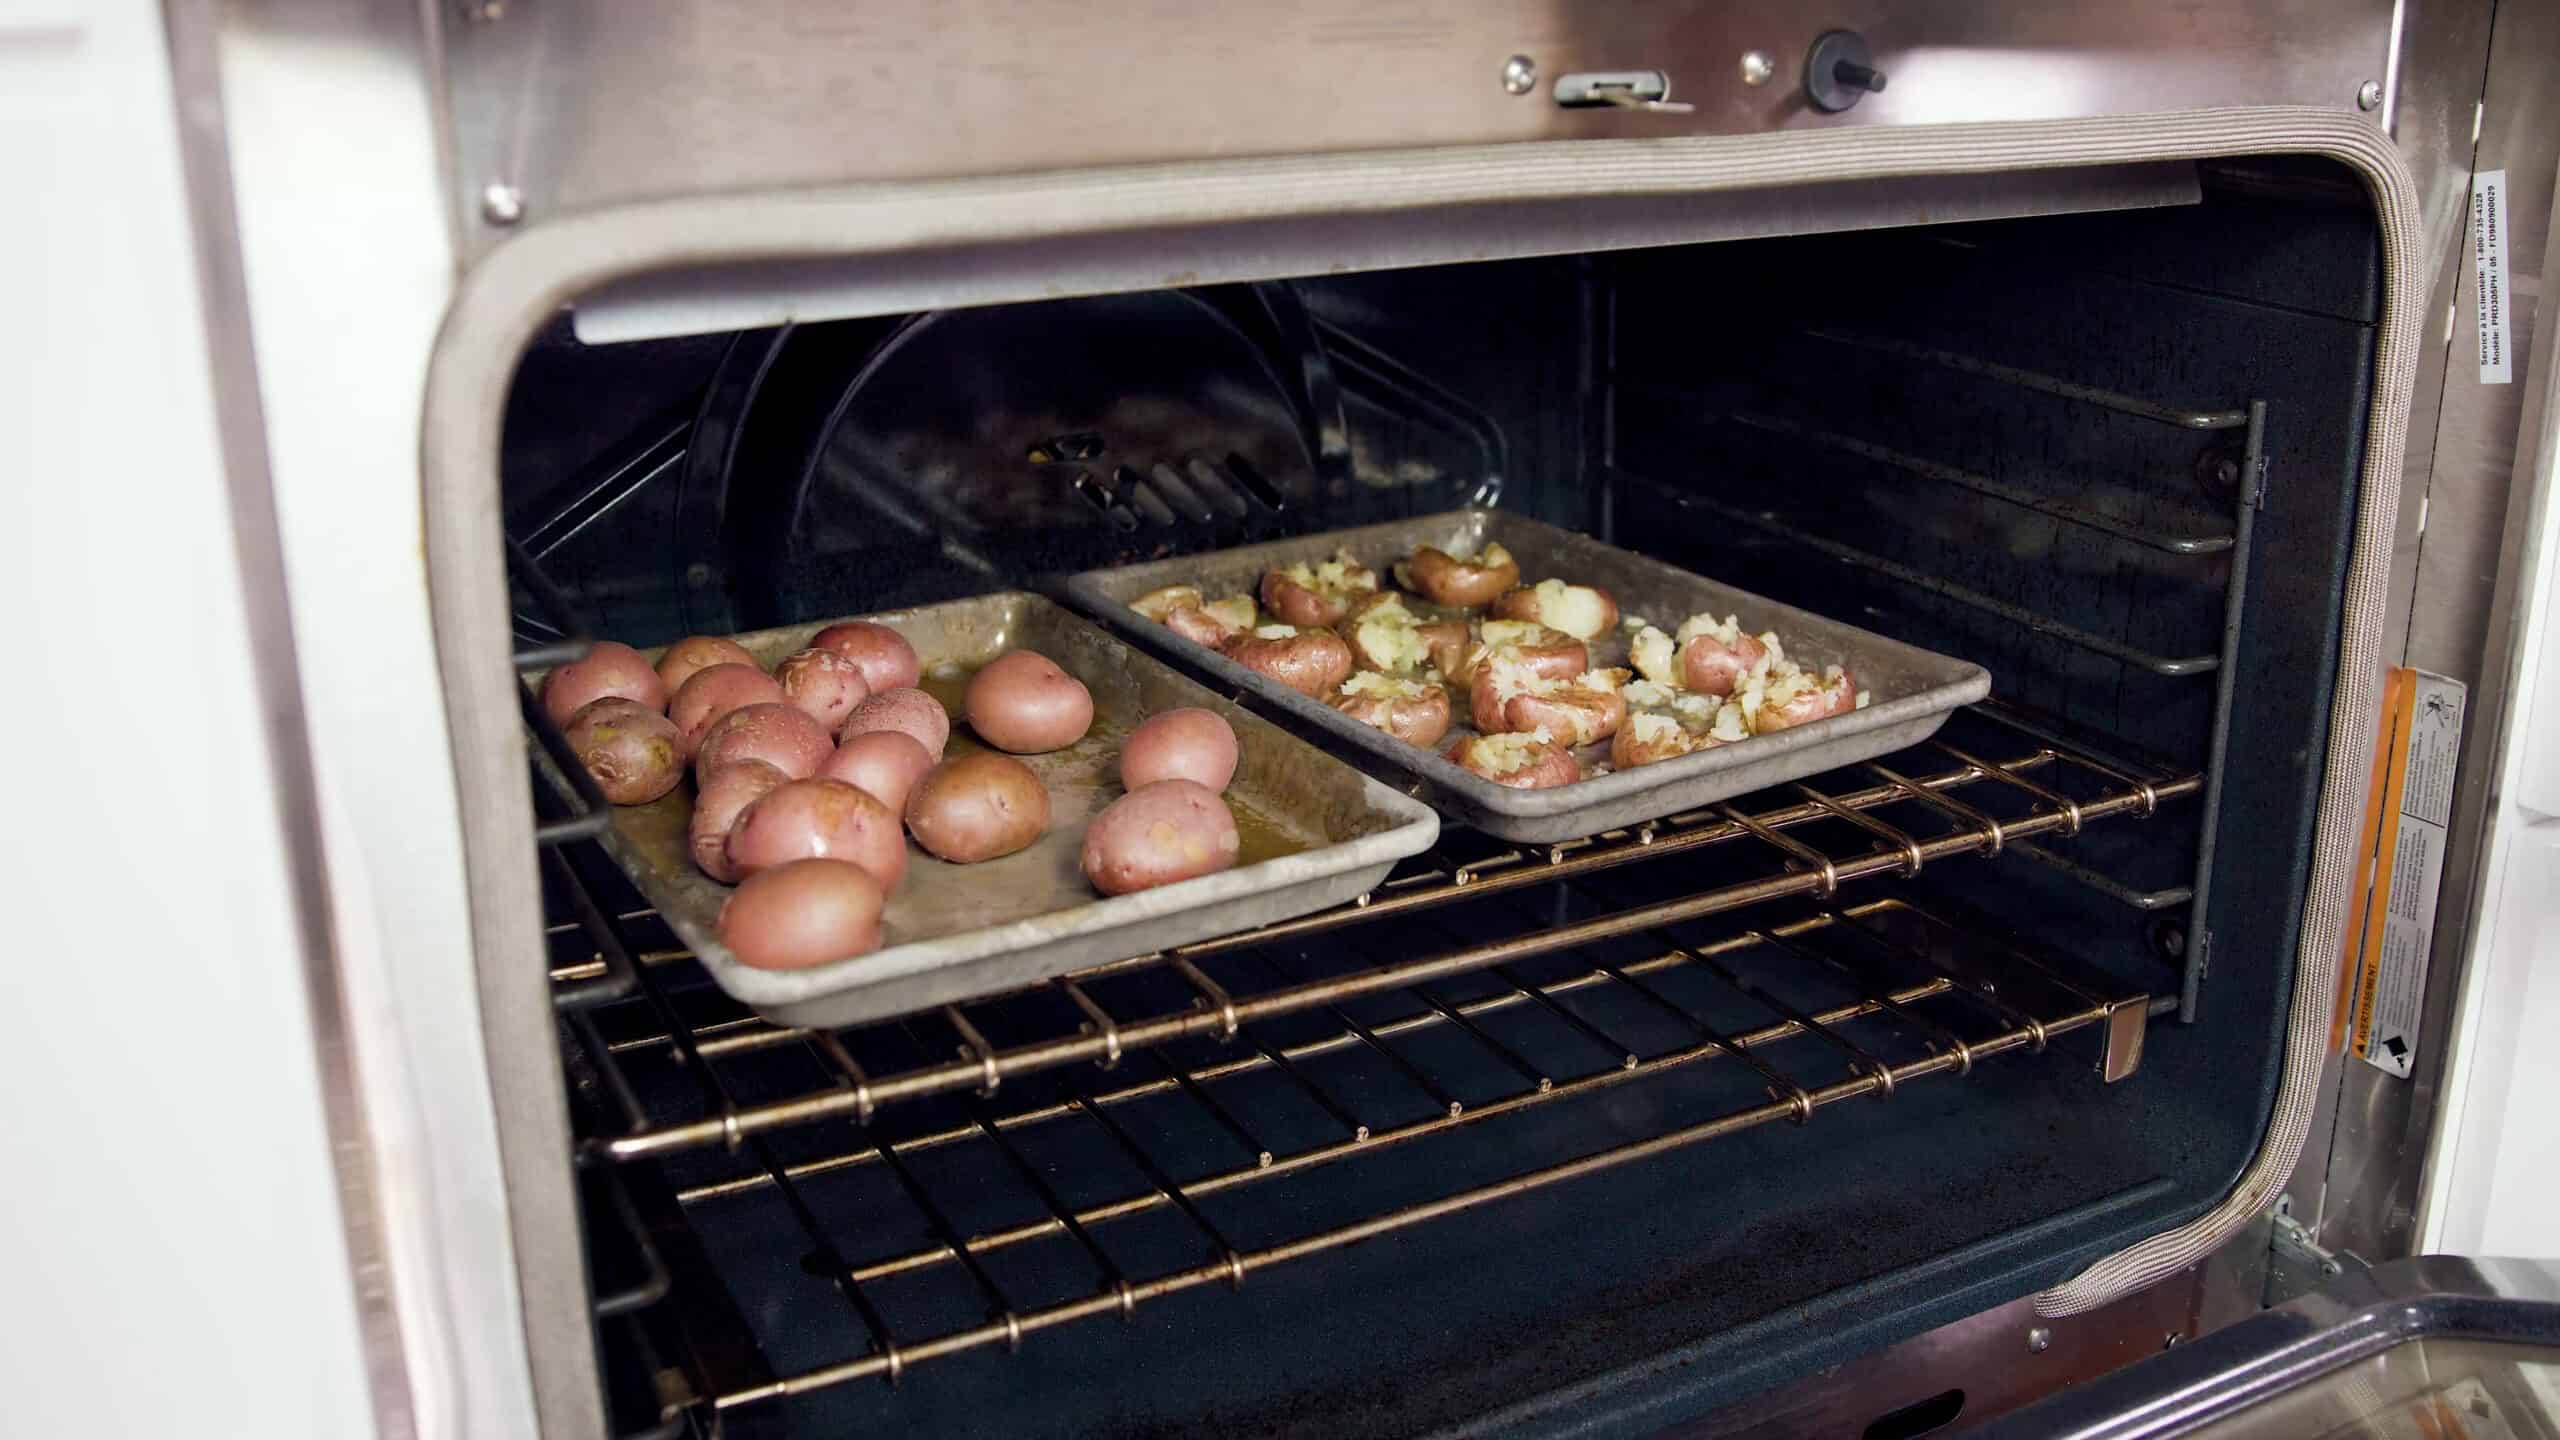 Angled view of open oven with two metal baking sheets, one of the left with whole red potatoes, and one on the right with smashed red potatoes with melted butter mixture poured on top all set on a metal rack in the middle of the oven.